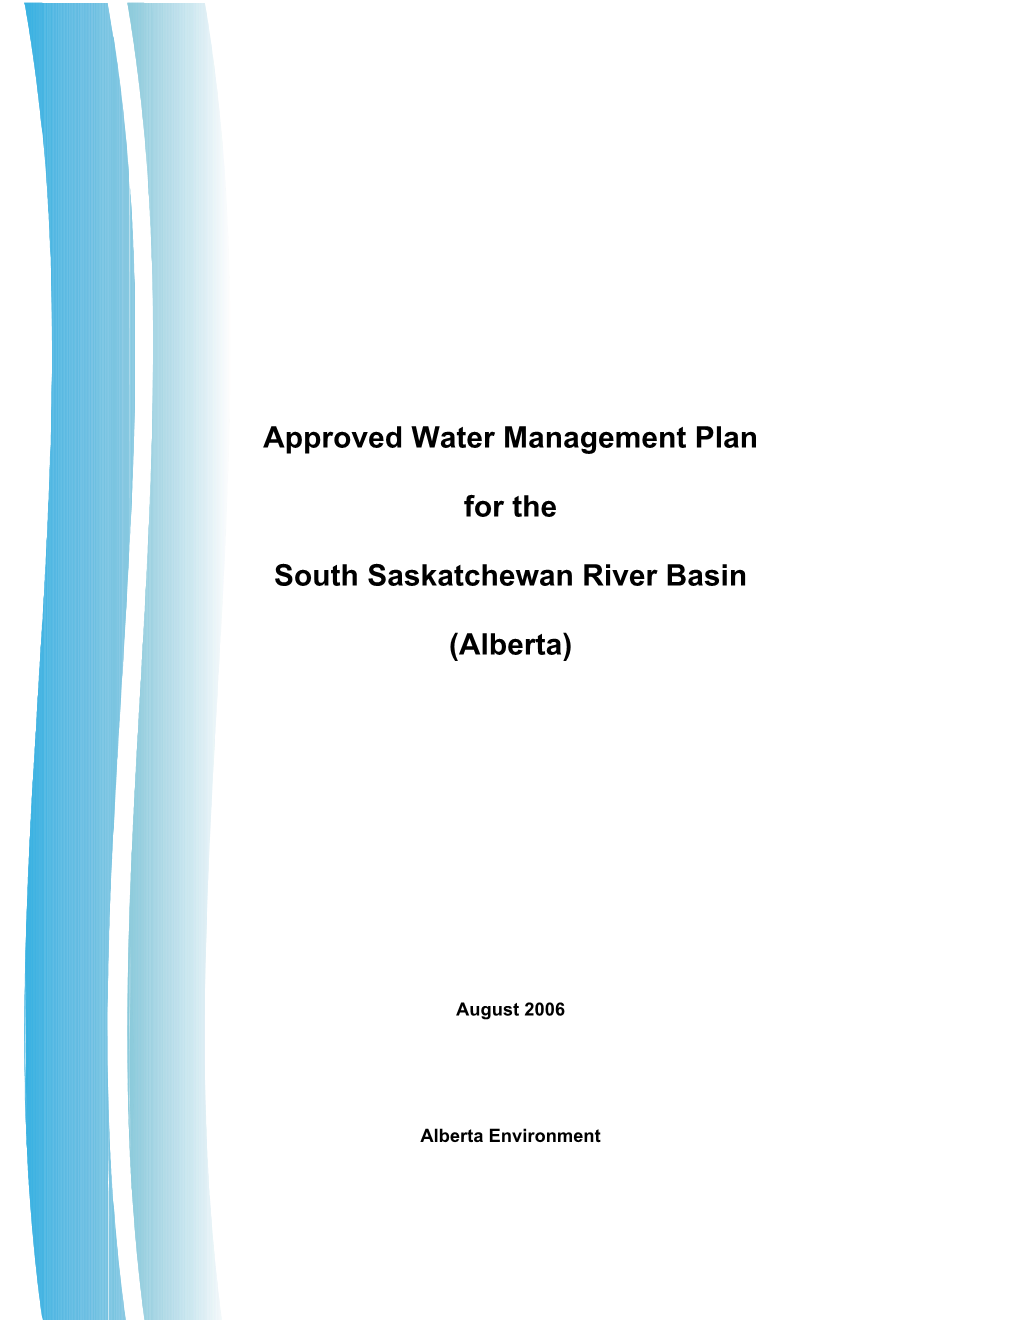 Approved Water Management Plan for the South Saskatchewan River Basin (Alberta)